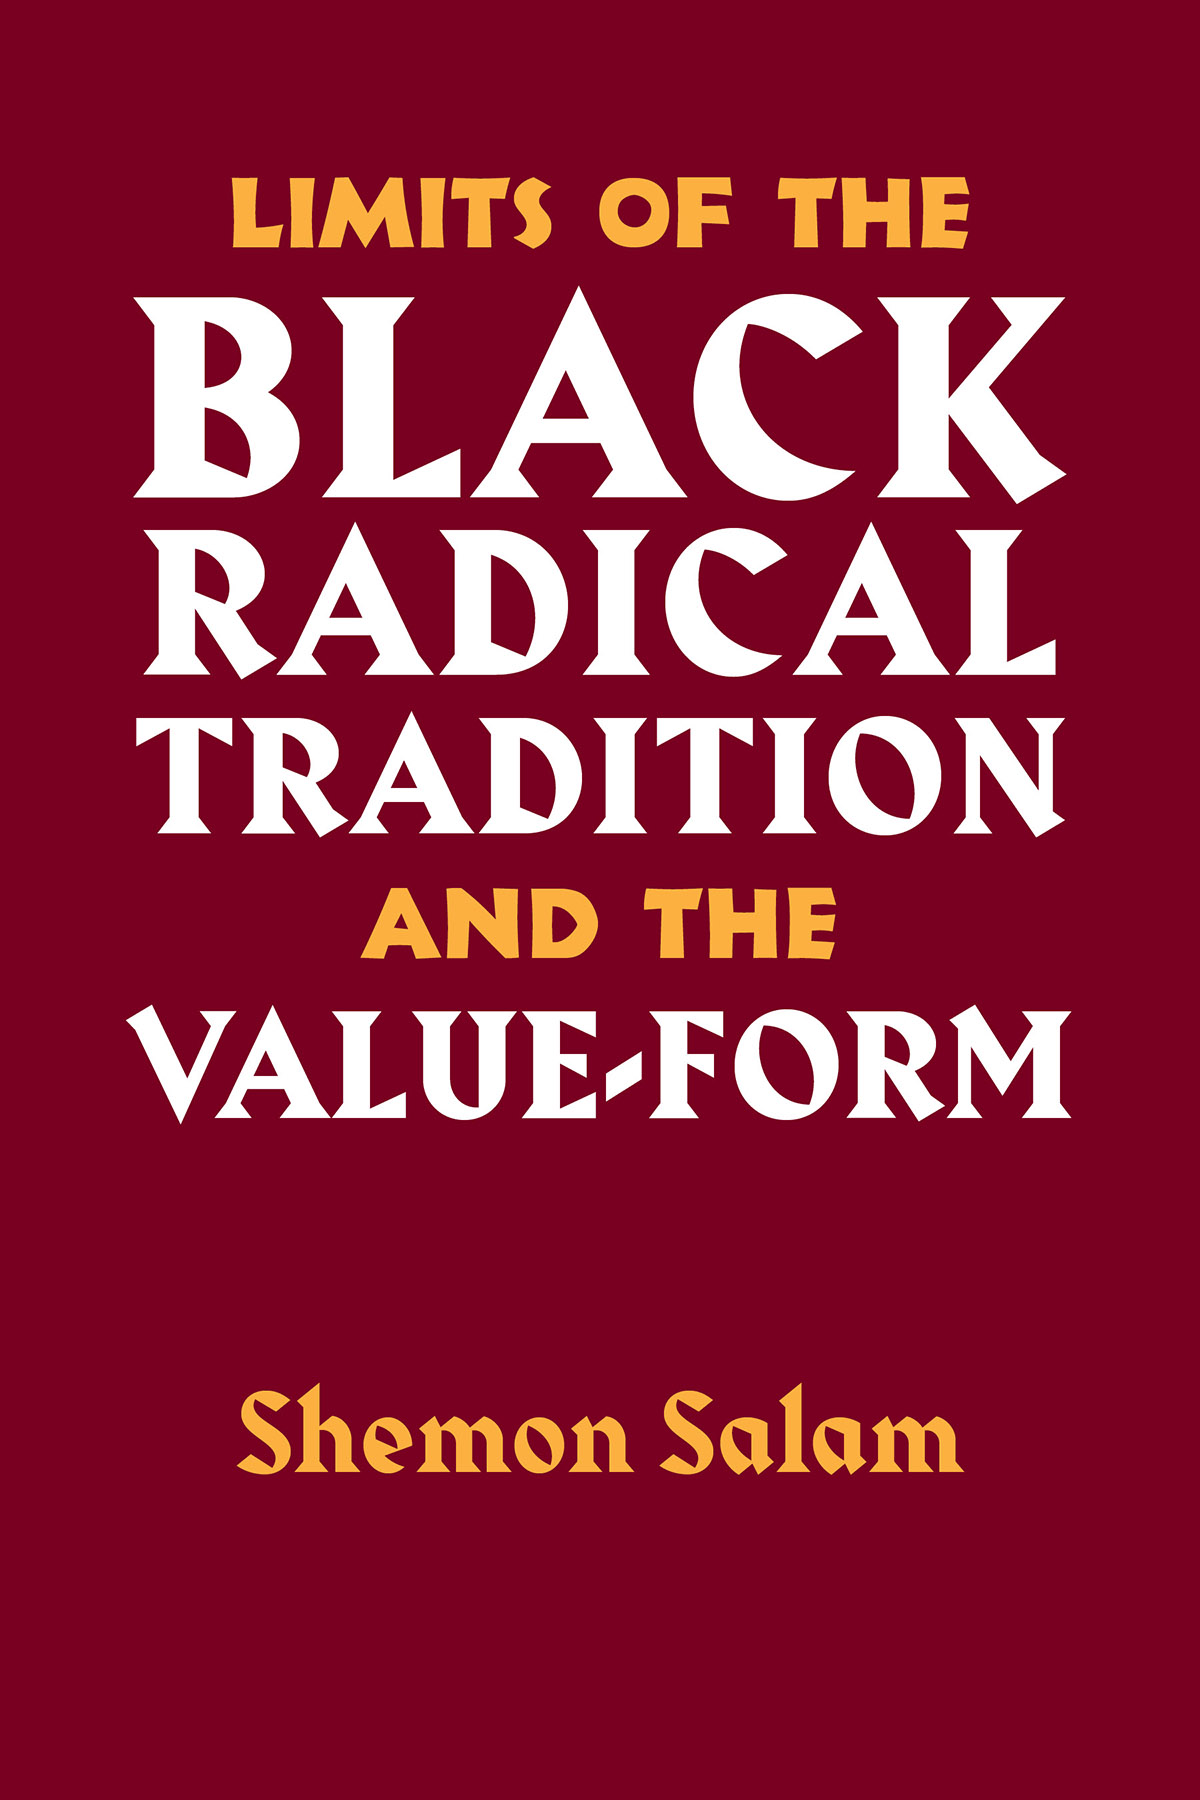 The cover of Limits of the Black Radical Tradition and the Value-Form by Shemon Salam.